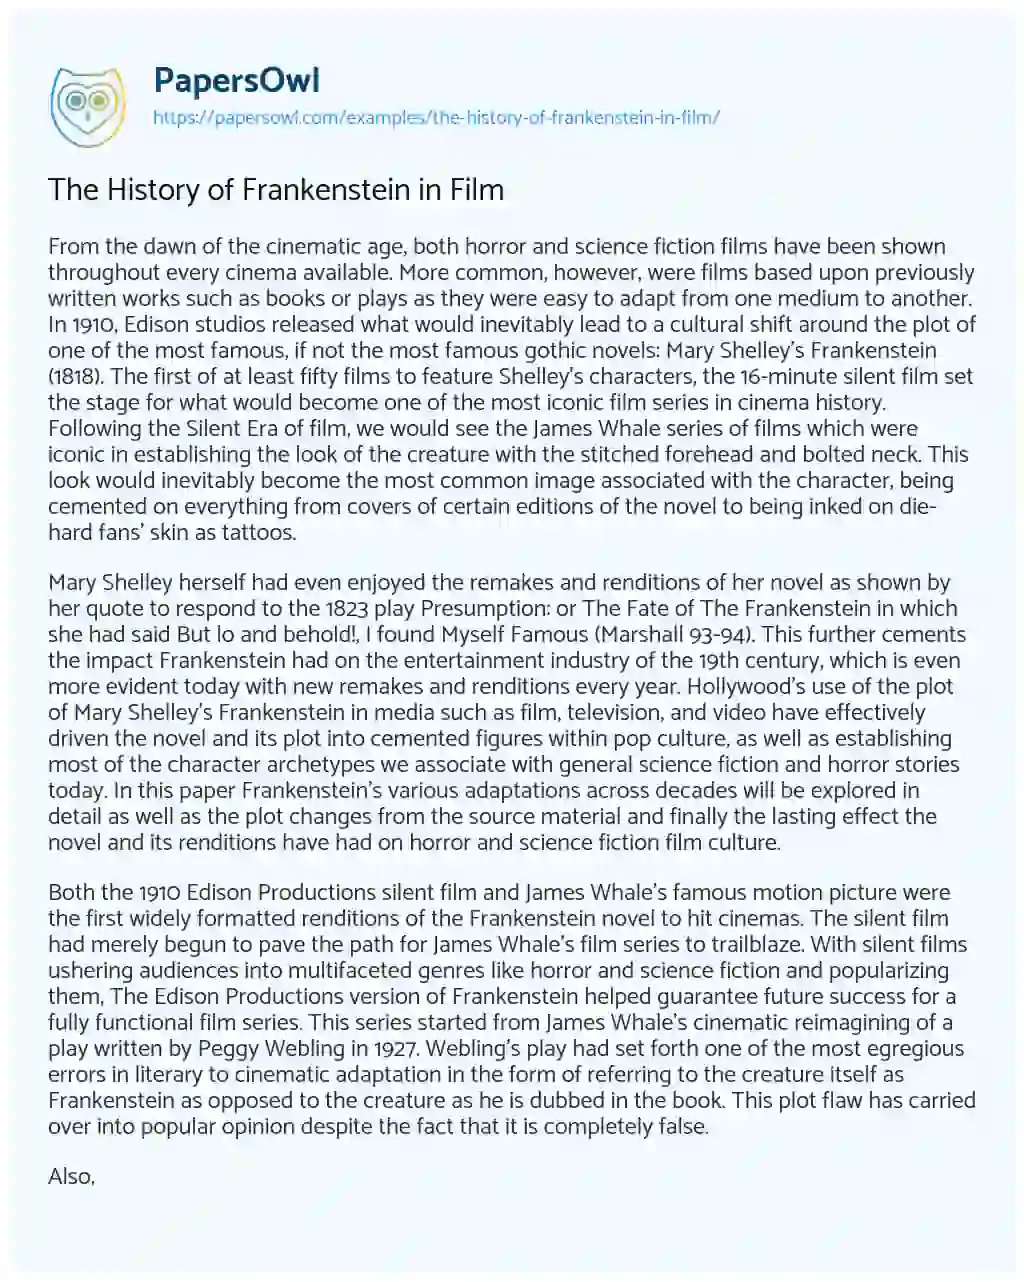 Essay on The History of Frankenstein in Film